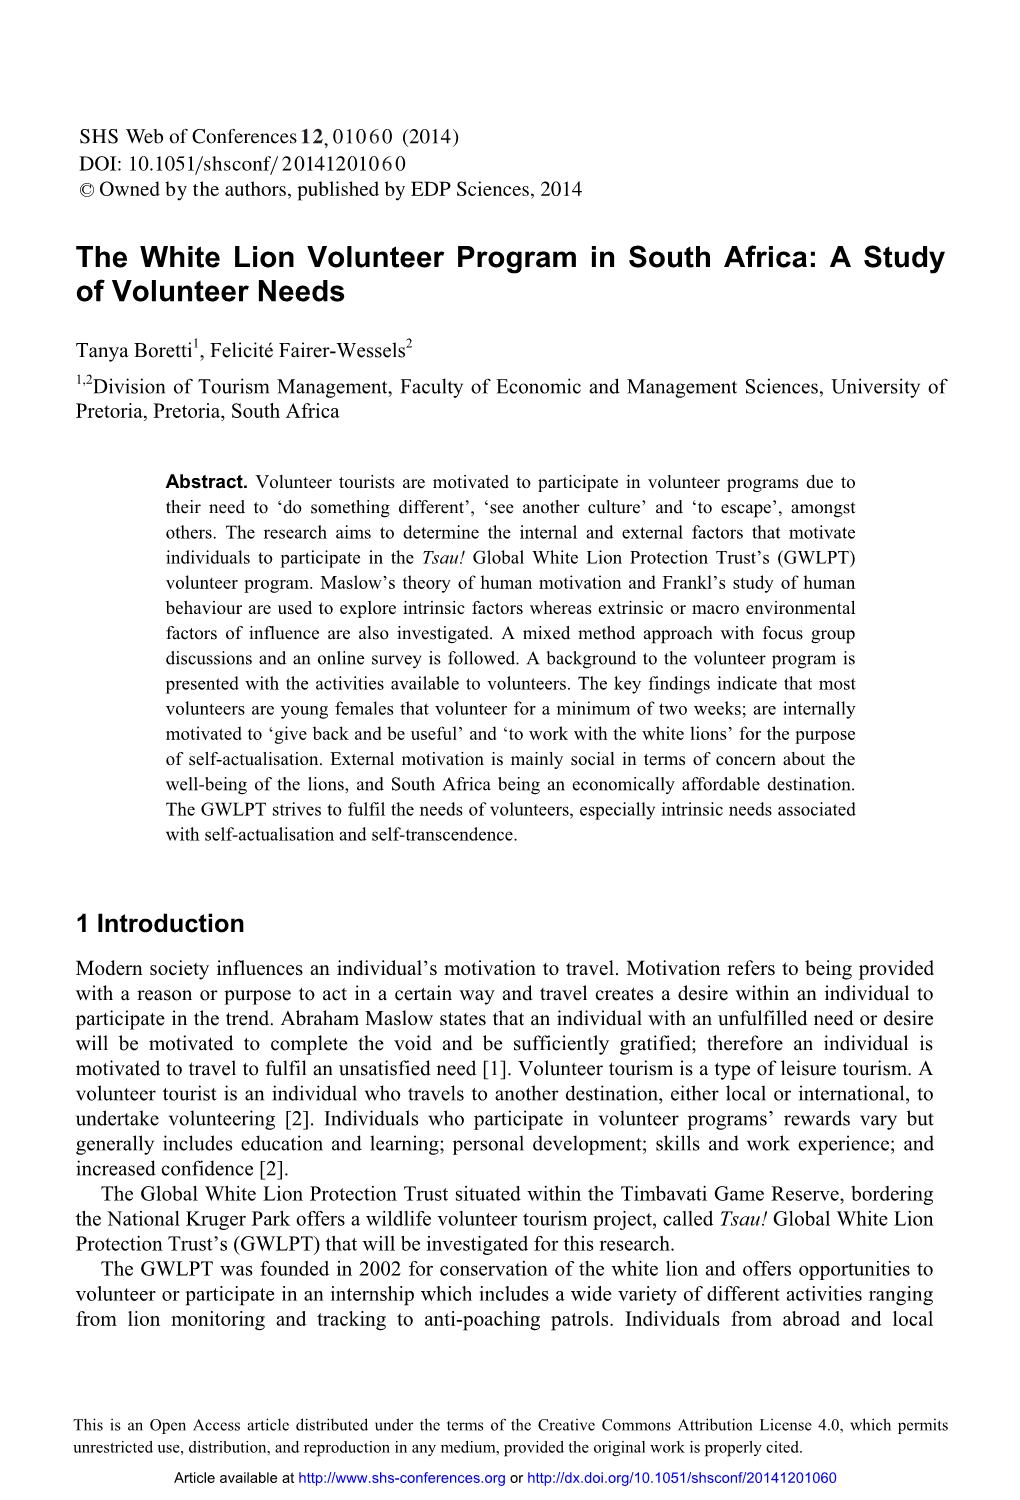 The White Lion Volunteer Program in South Africa: a Study of Volunteer Needs